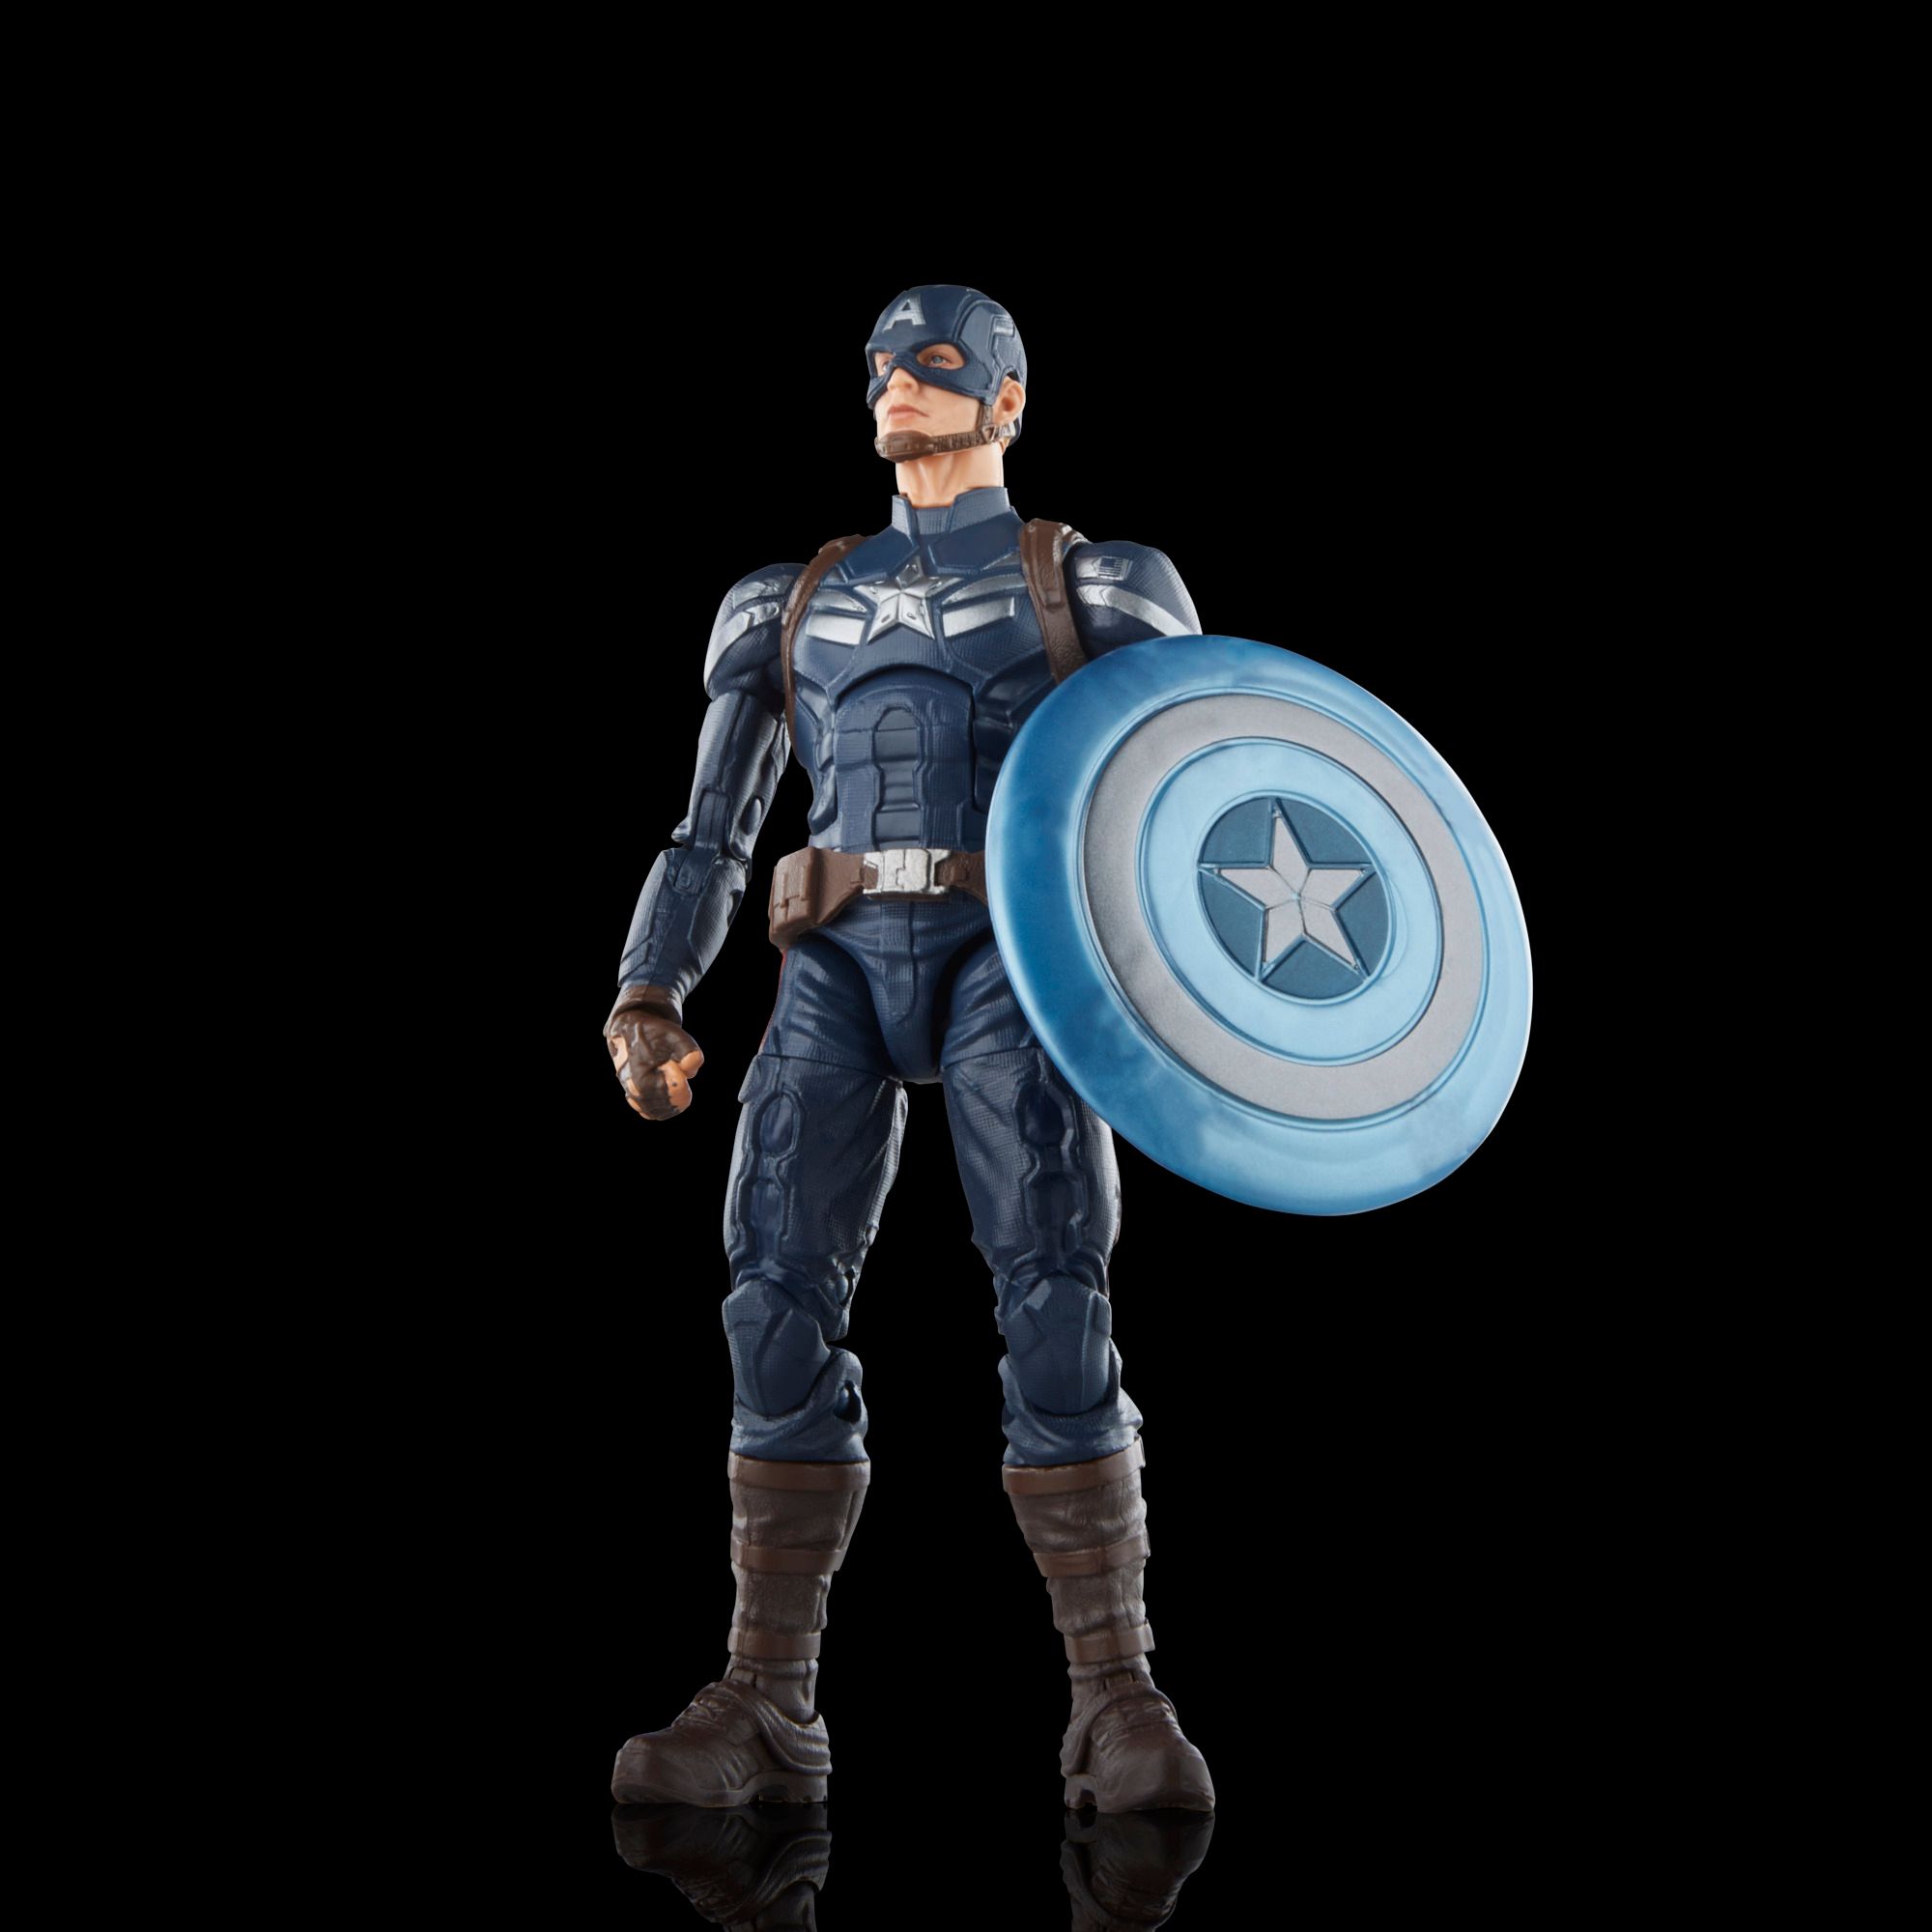 Marvel Legends Line Assembles The Avengers With New Wave of